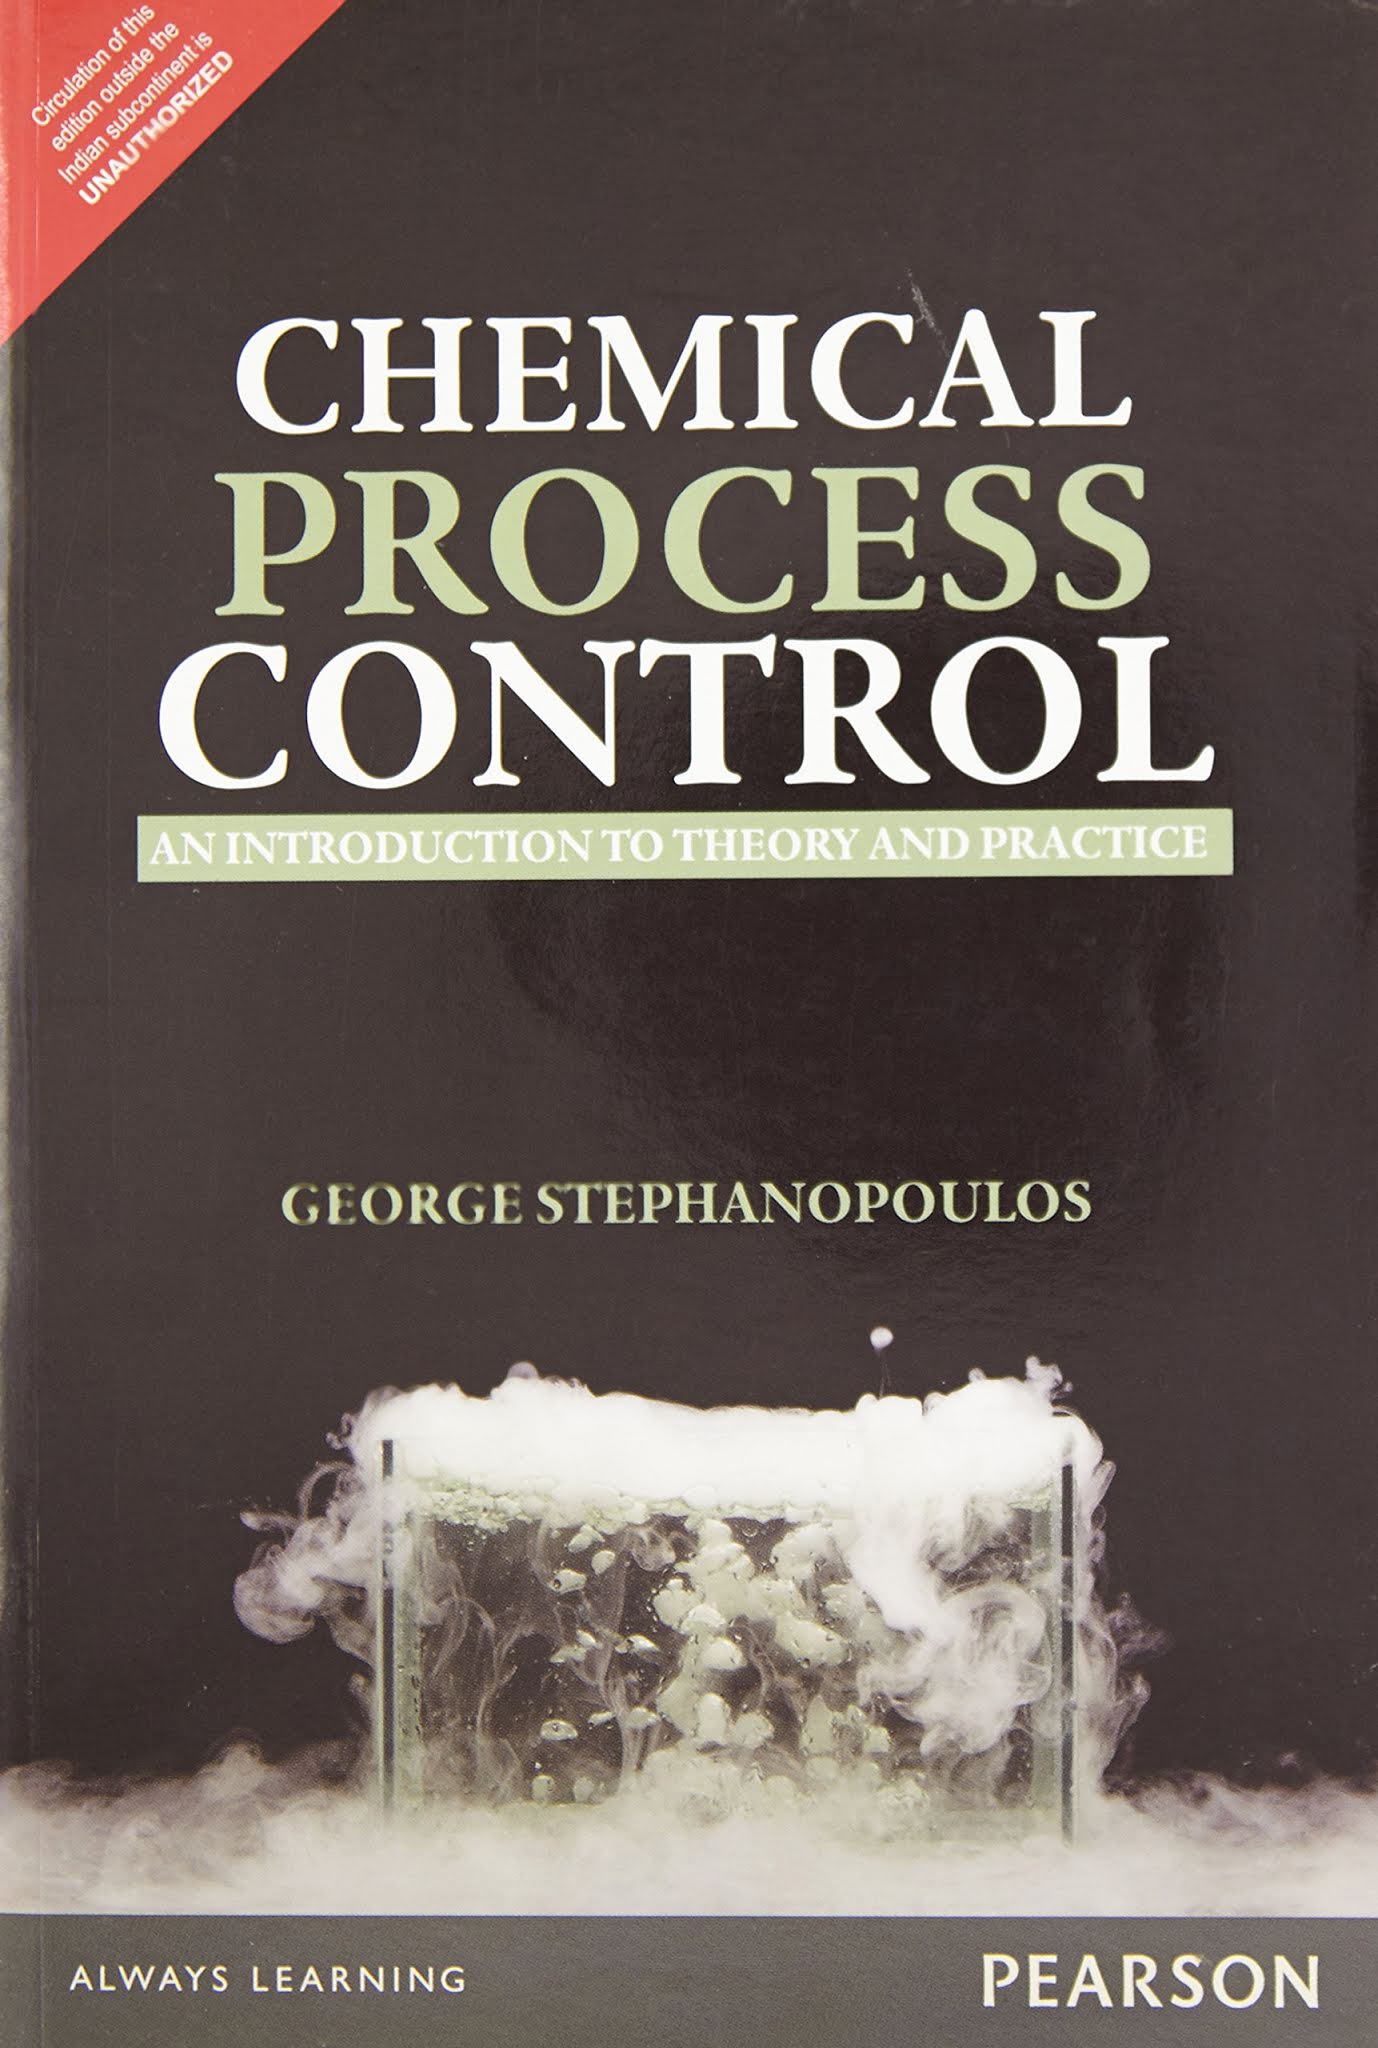 Chemical Process Control Stephanopoulos PDF Free Download